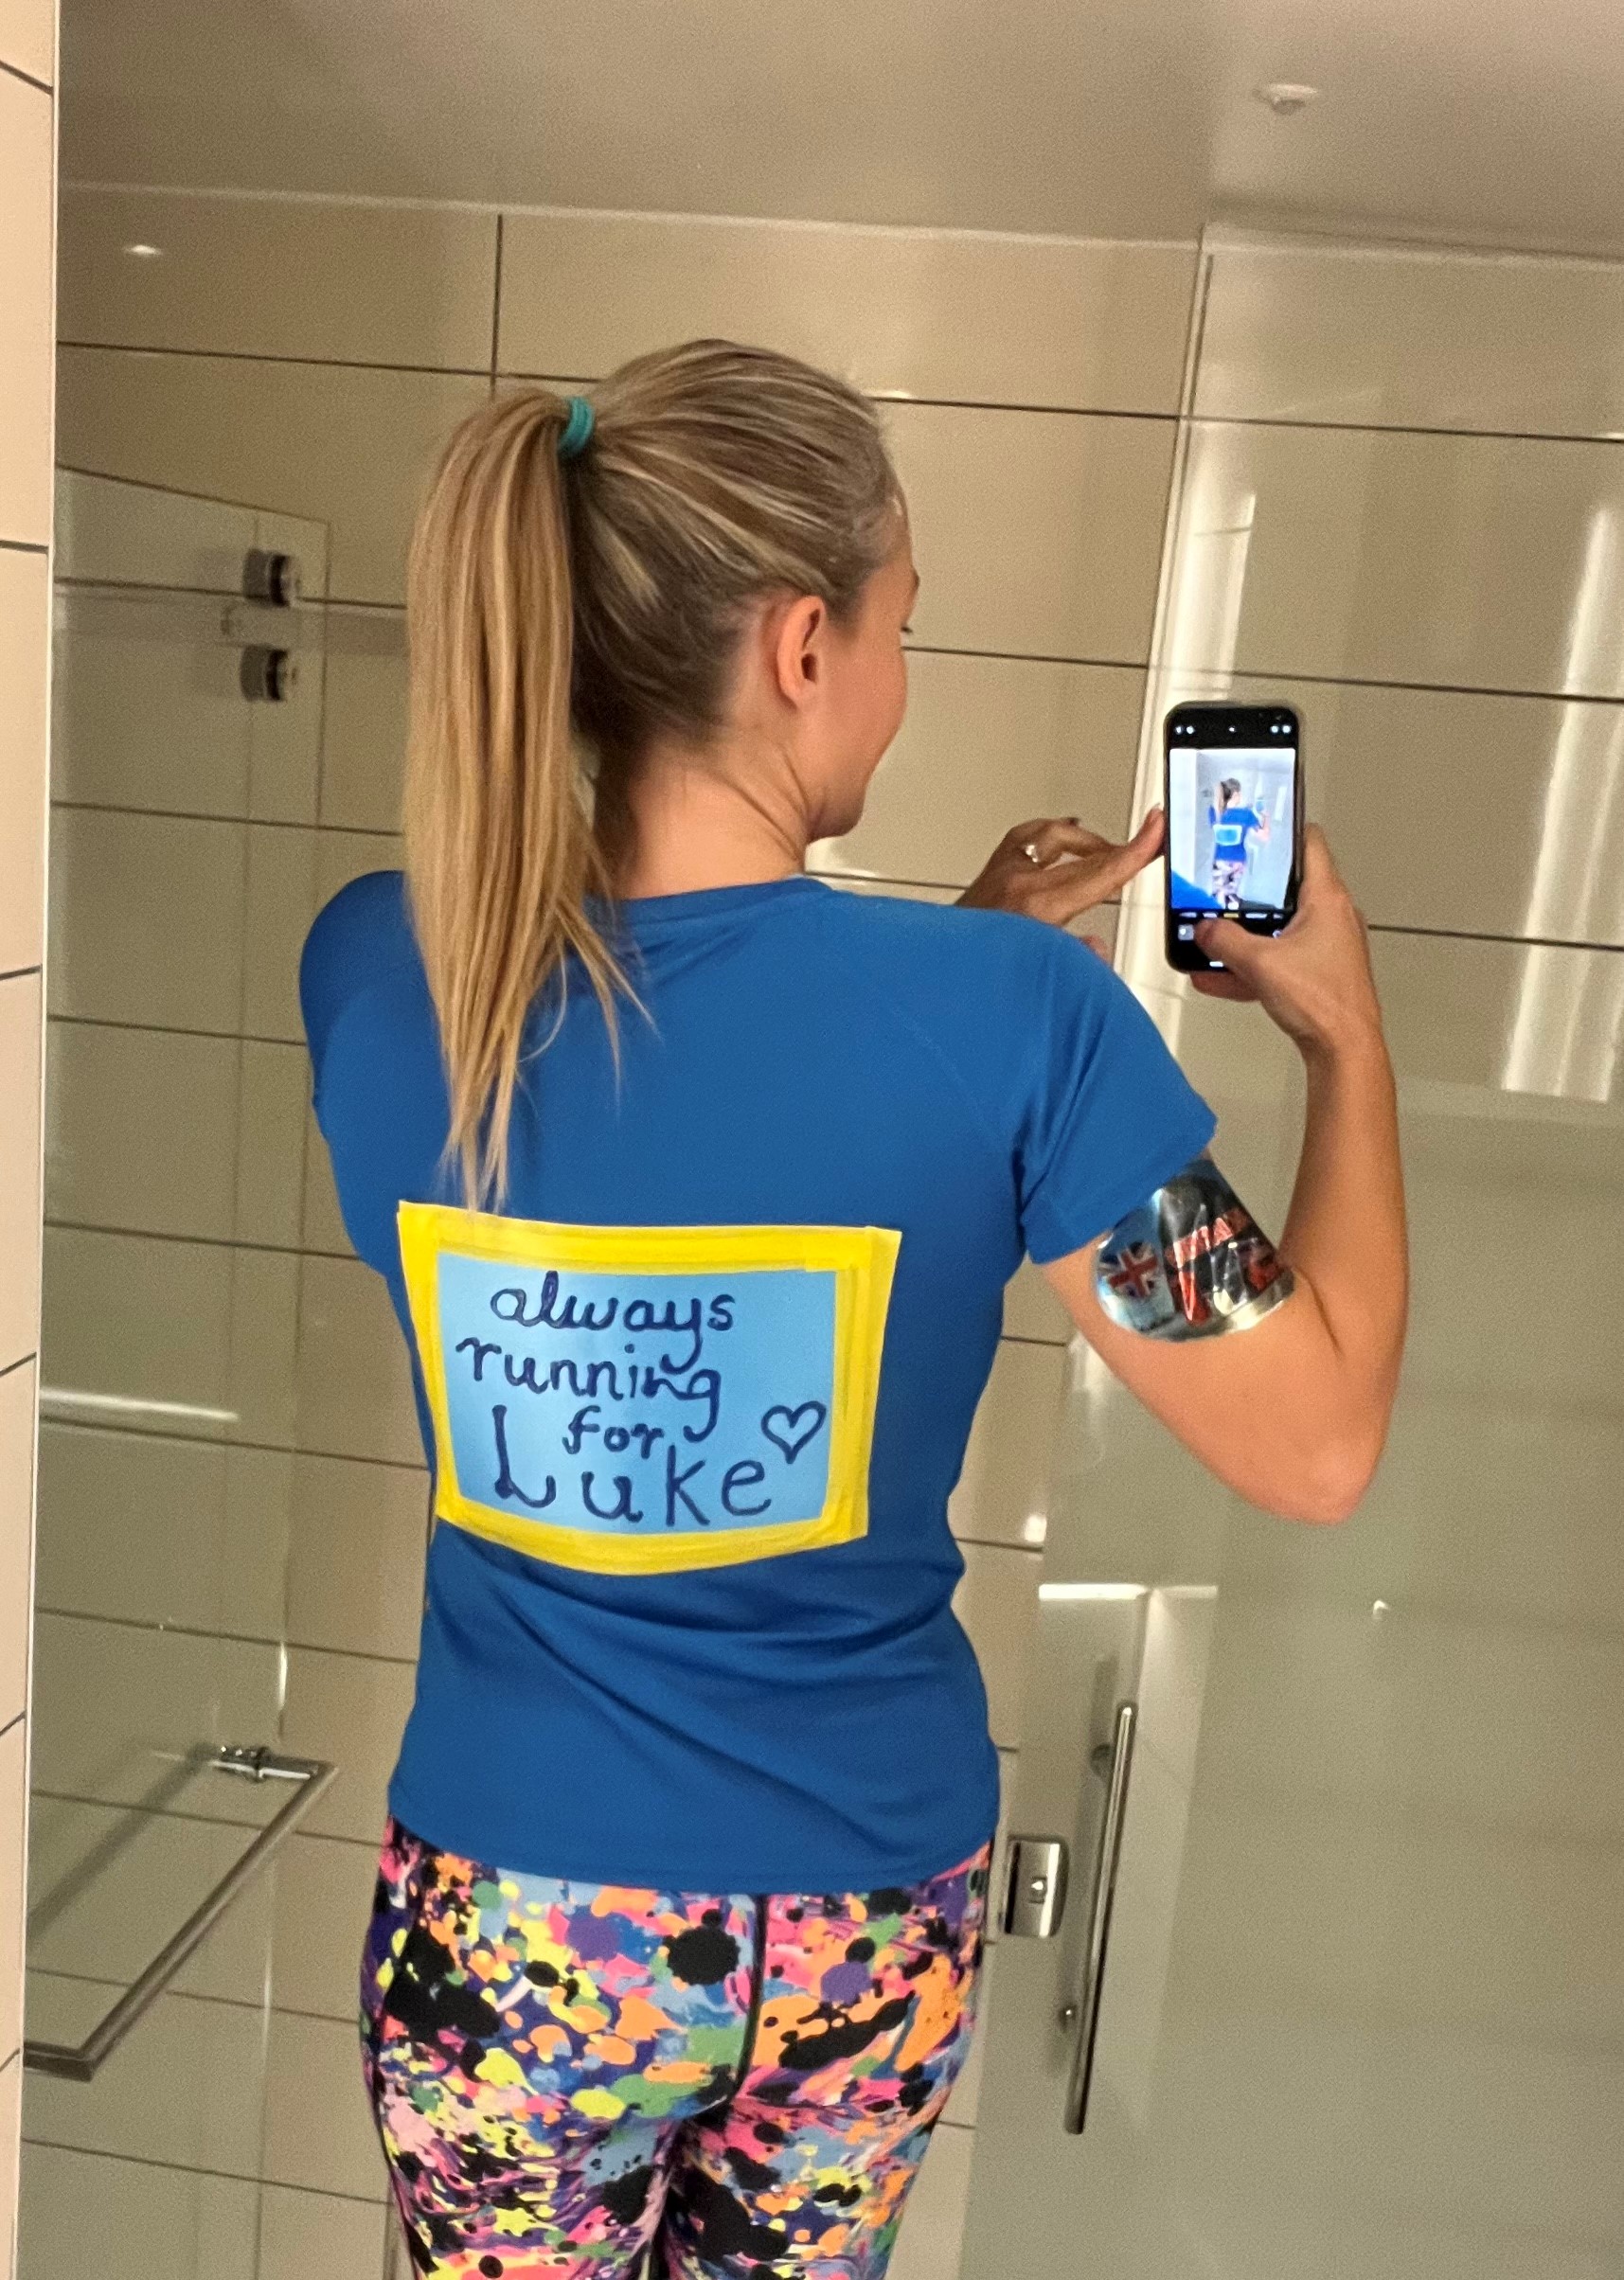 A woman in running clothes is taking a mirror selfie over her shoulder to show the back of her t-shirt, which reads 'Always running for Luke'.